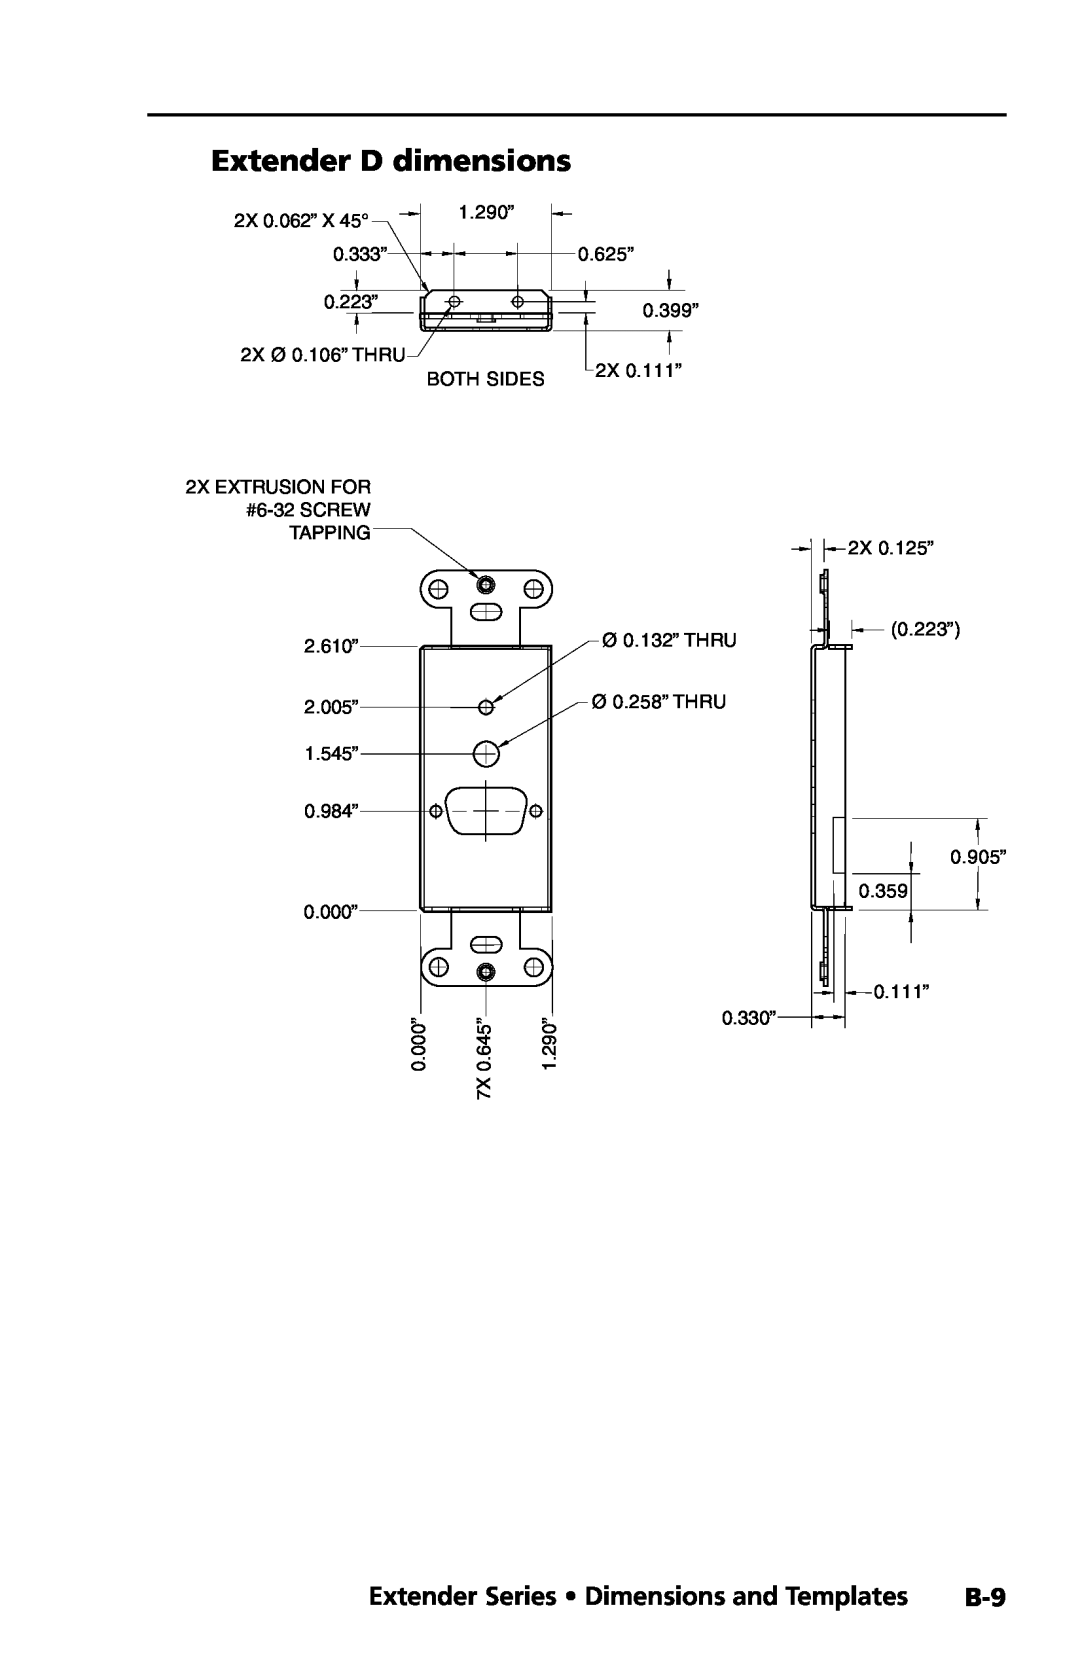 Extron electronic manual Extender D dimensions, Preliminary, Extender Series Dimensions and Templates, Tapping 